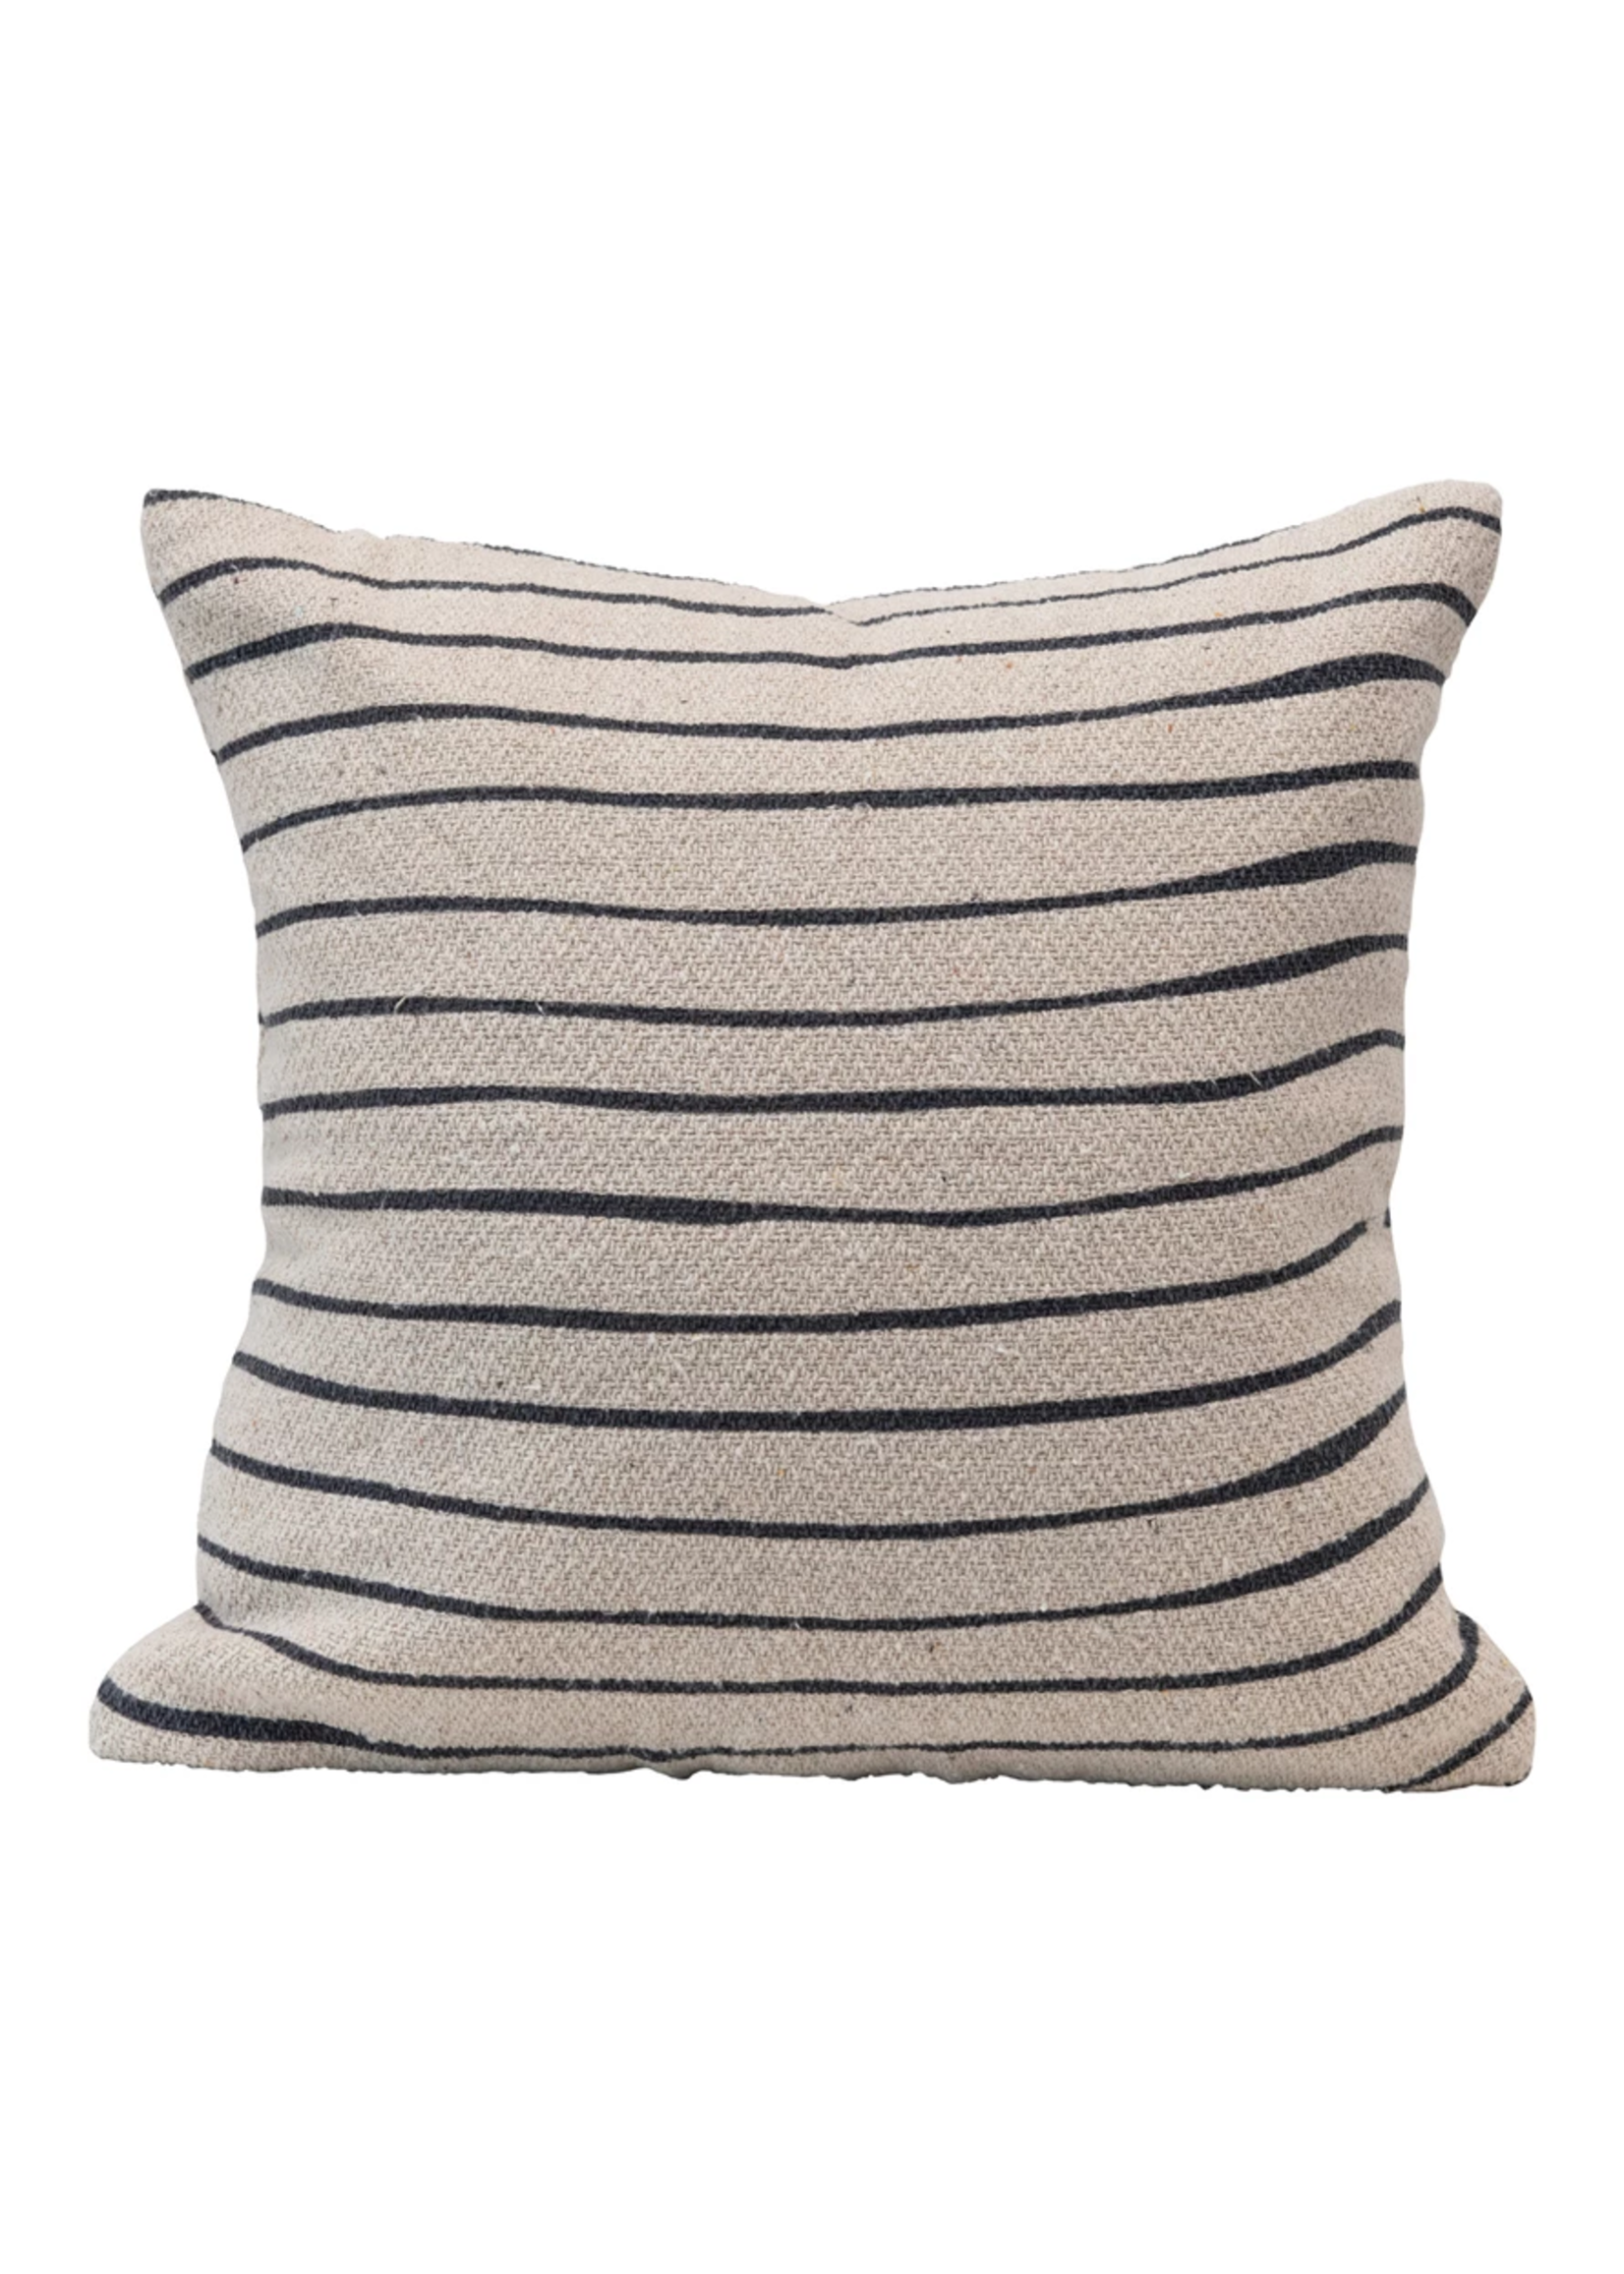 Black & Cream 20" Recycled Cotton Blend Pillow w/ Stripes, Polyester Fill